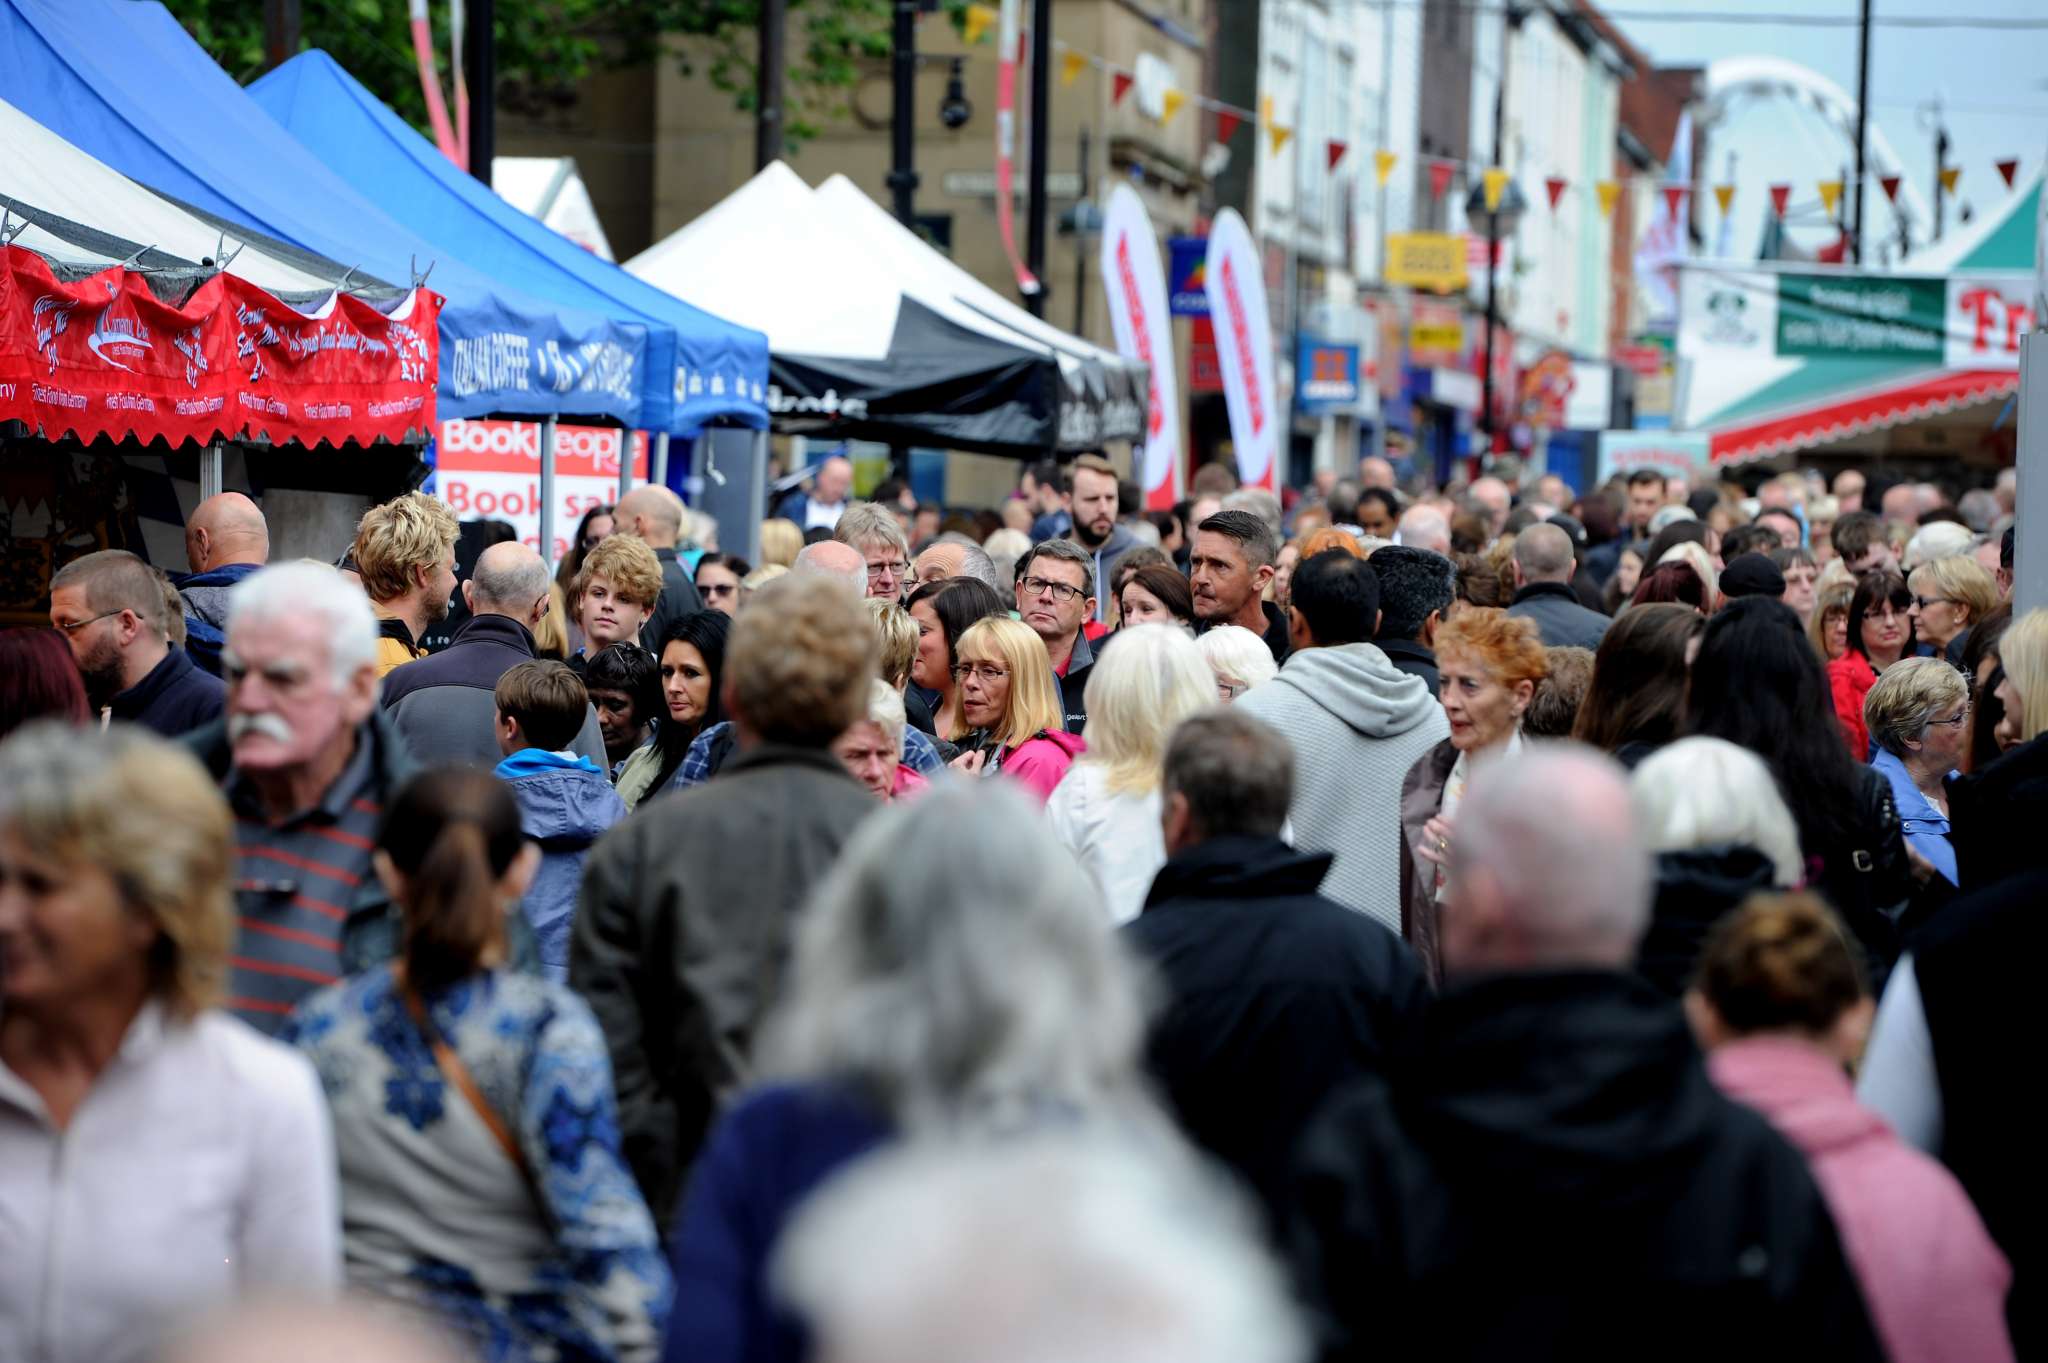 NOT LONG NOW… COUNTDOWN IS ON FOR BOLTON FOOD & DRINK FESTIVAL